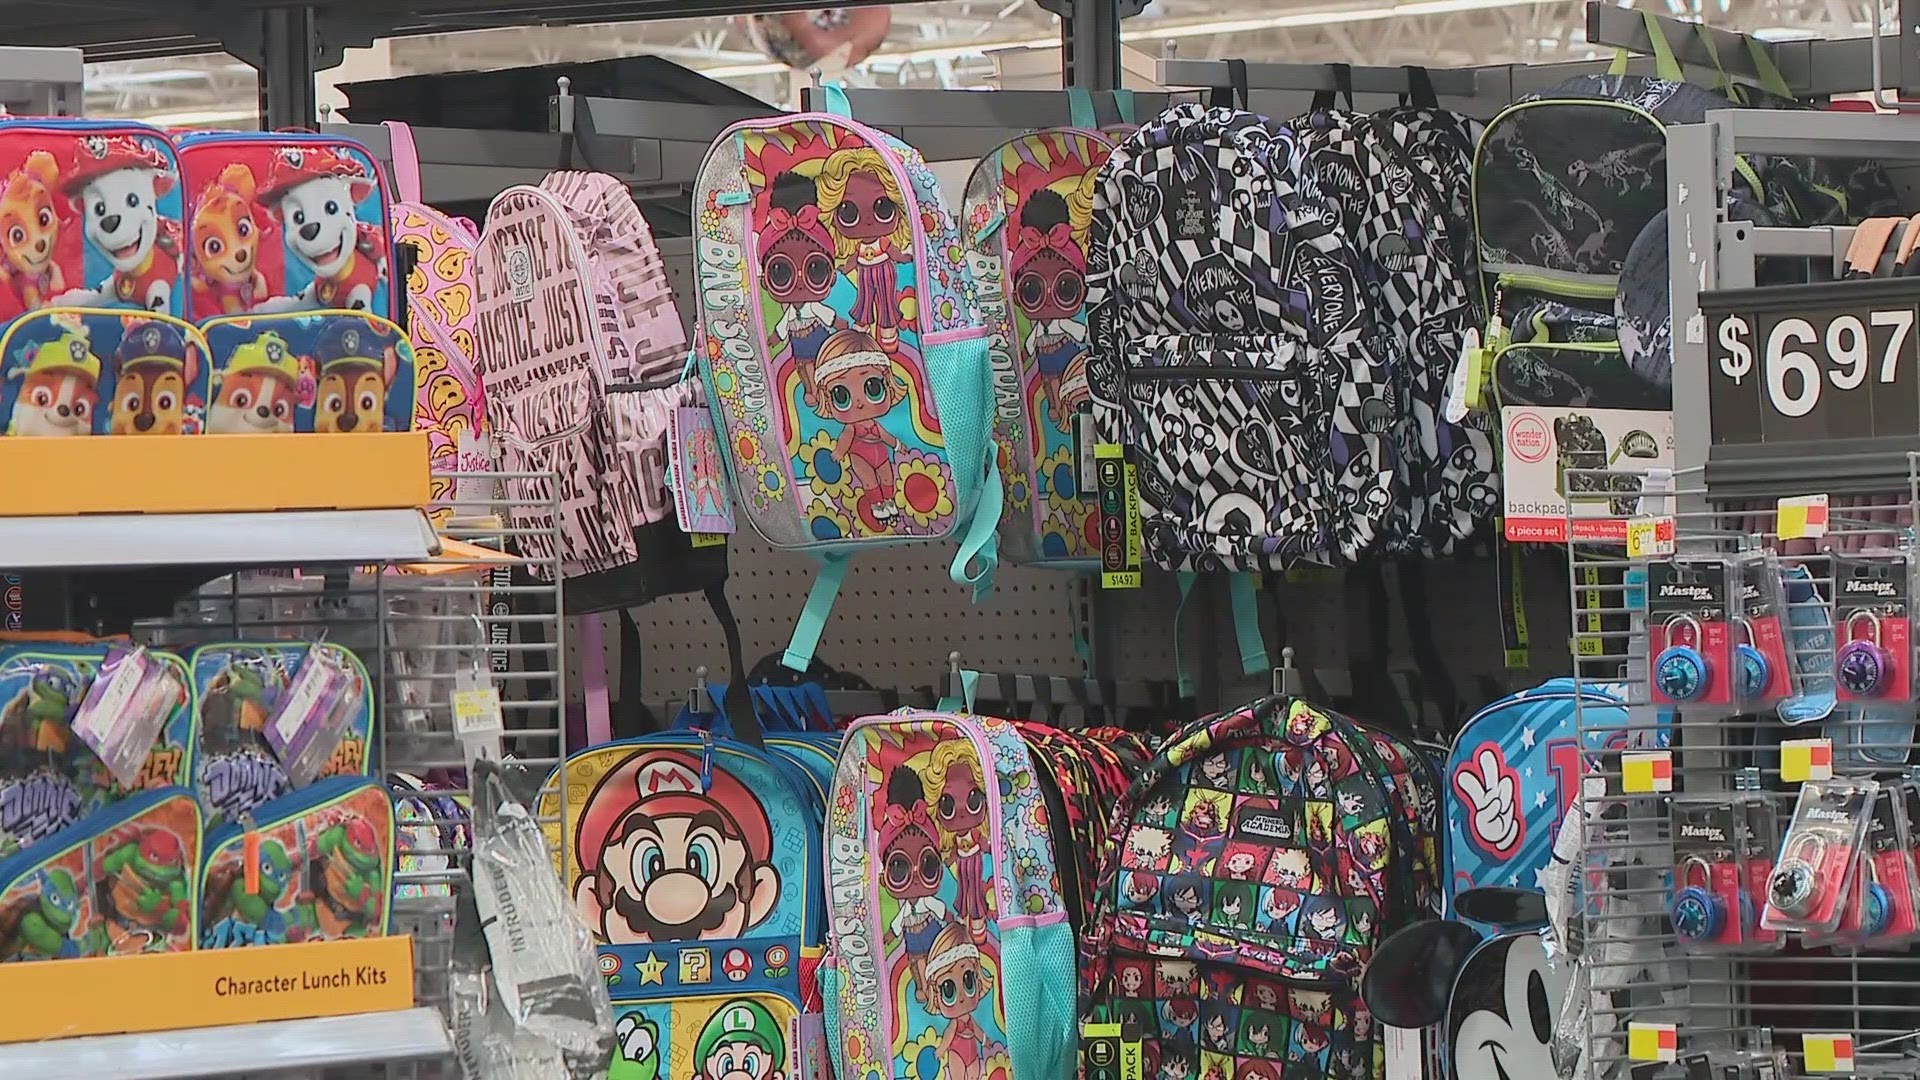 Rob Burnette, a financial planner believes back-to-school shopping should start with a "spending plan."